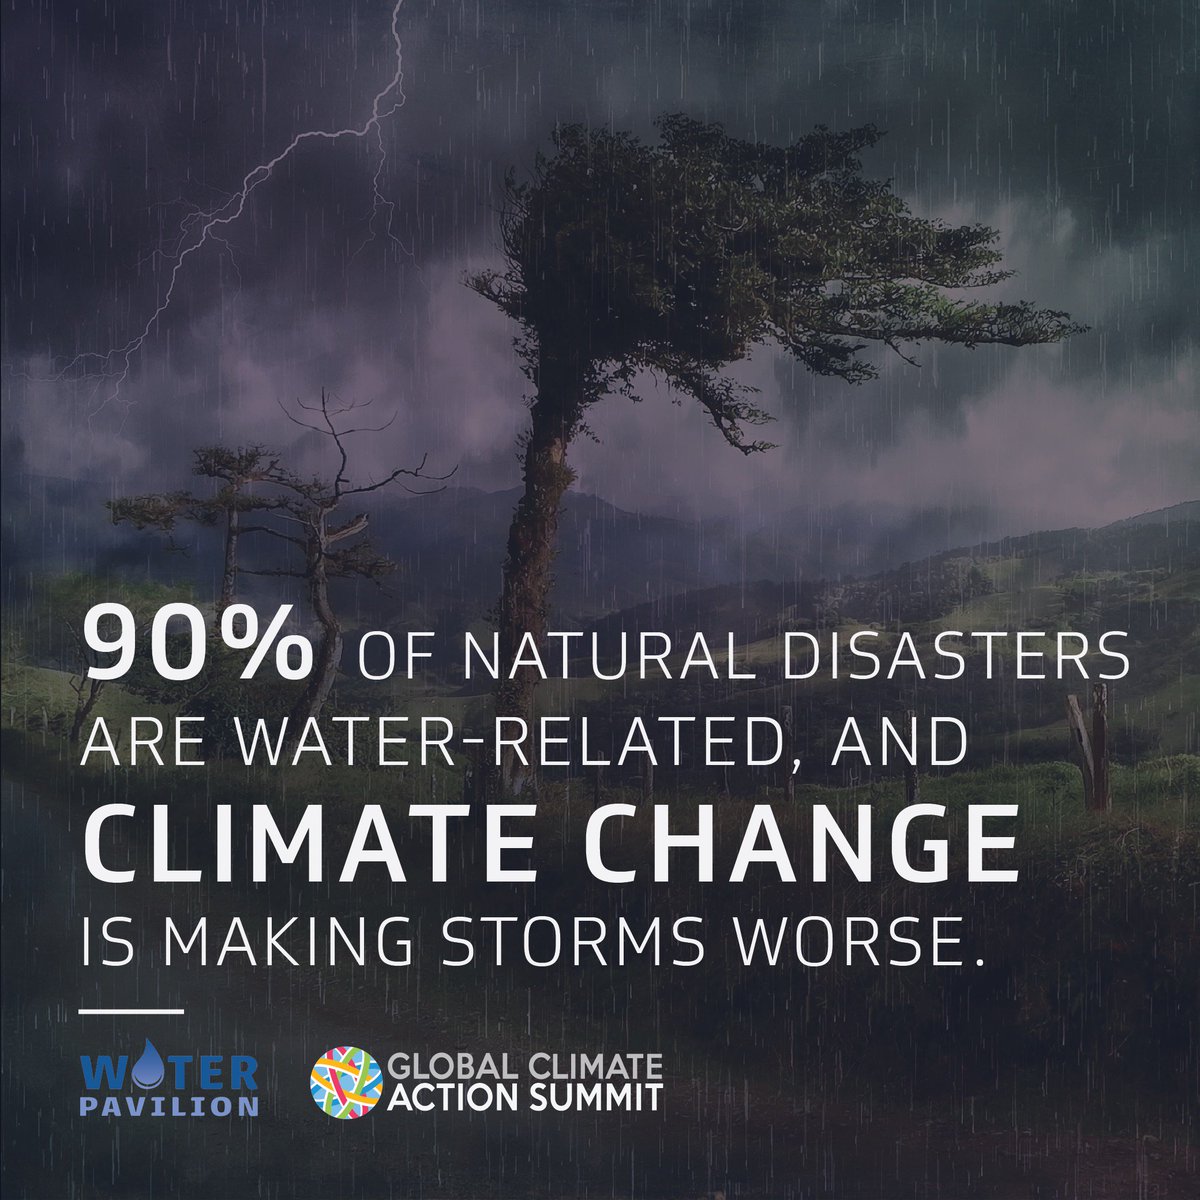 90% of natural disasters are water-related, and climate change is making extreme rainfall, floods, and storms worse. #WaterPavilion #GCAS2018